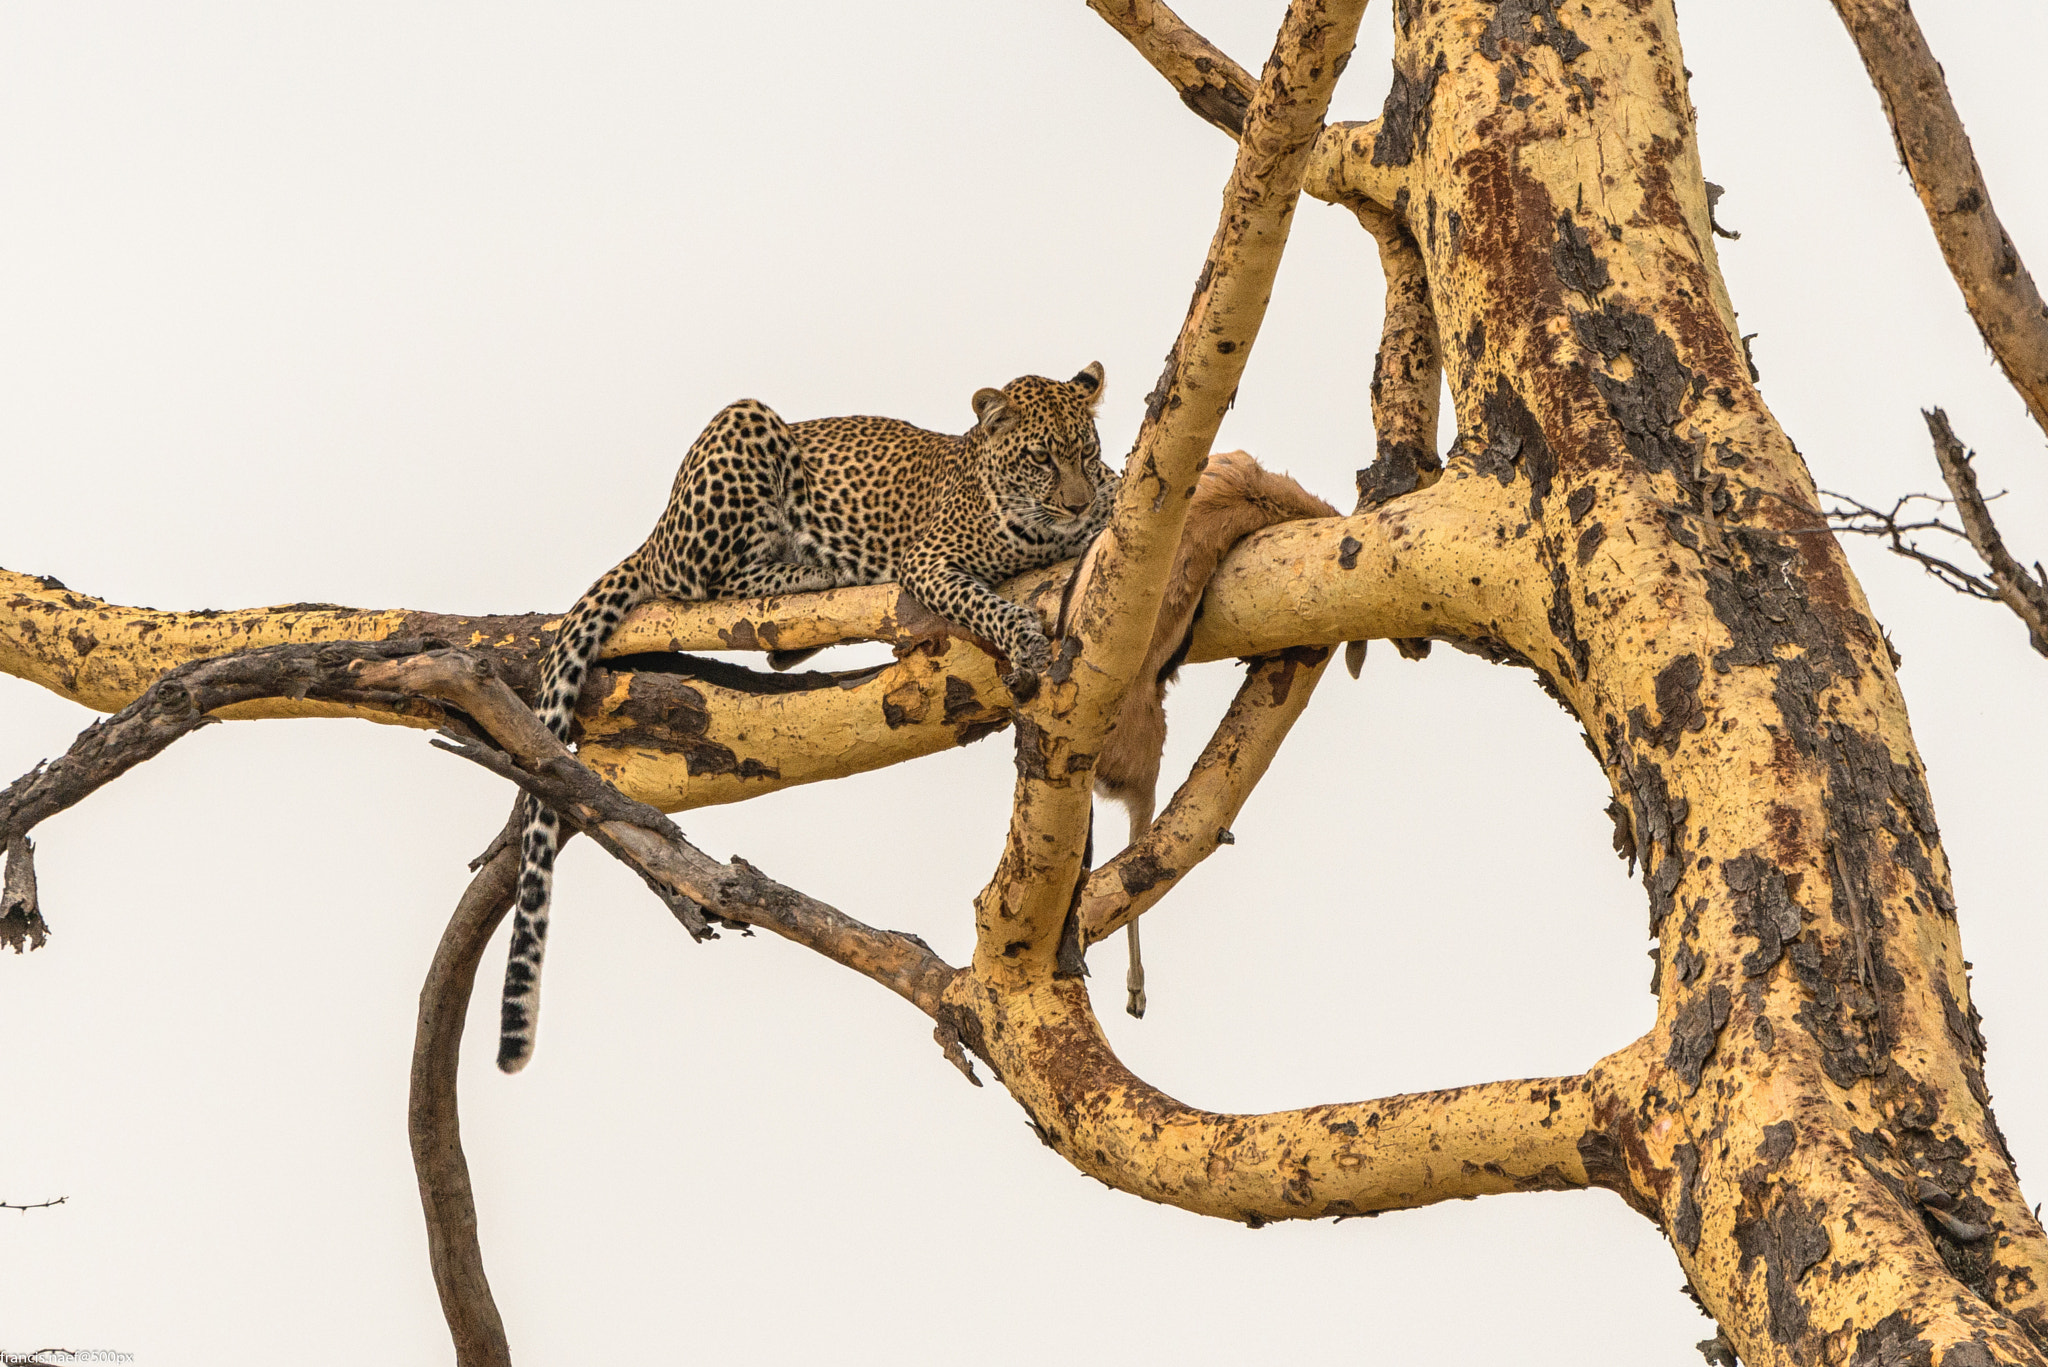 Nikon D800 + Sigma 150-600mm F5-6.3 DG OS HSM | S sample photo. Leopard and prey photography